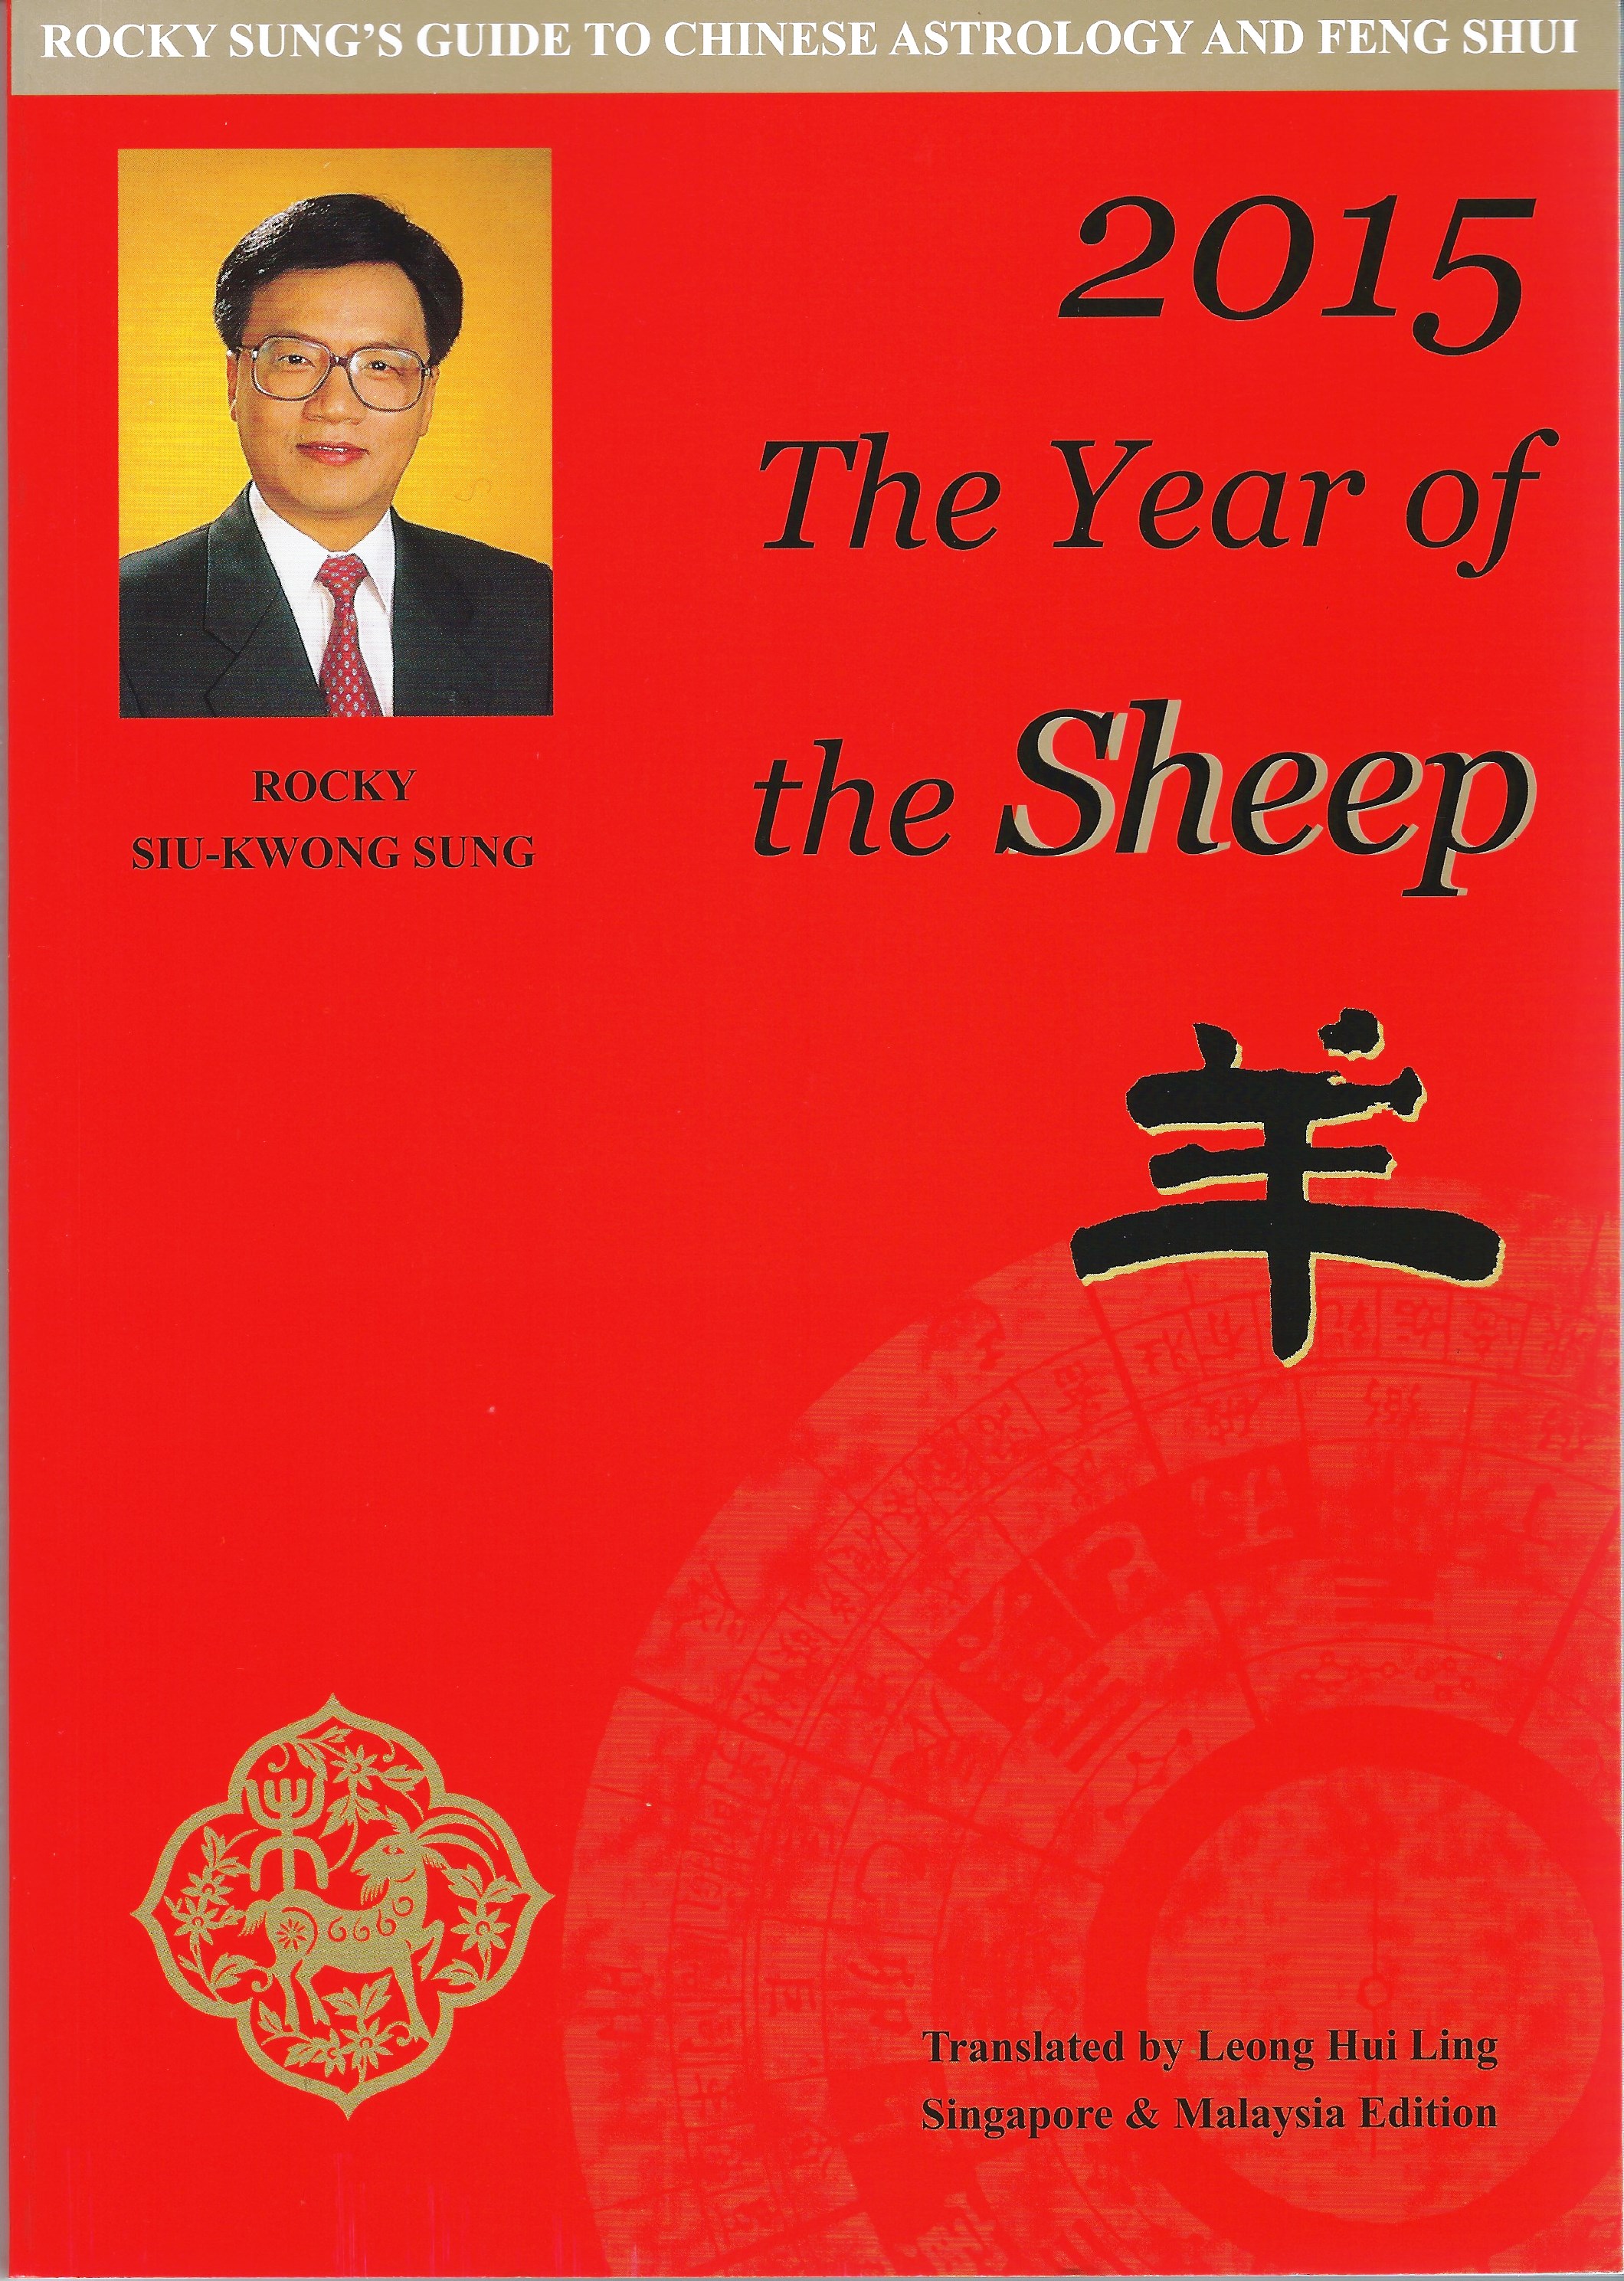 Rocky Sung's Guide to Chinese Astrology and Feng Shui ; 2015